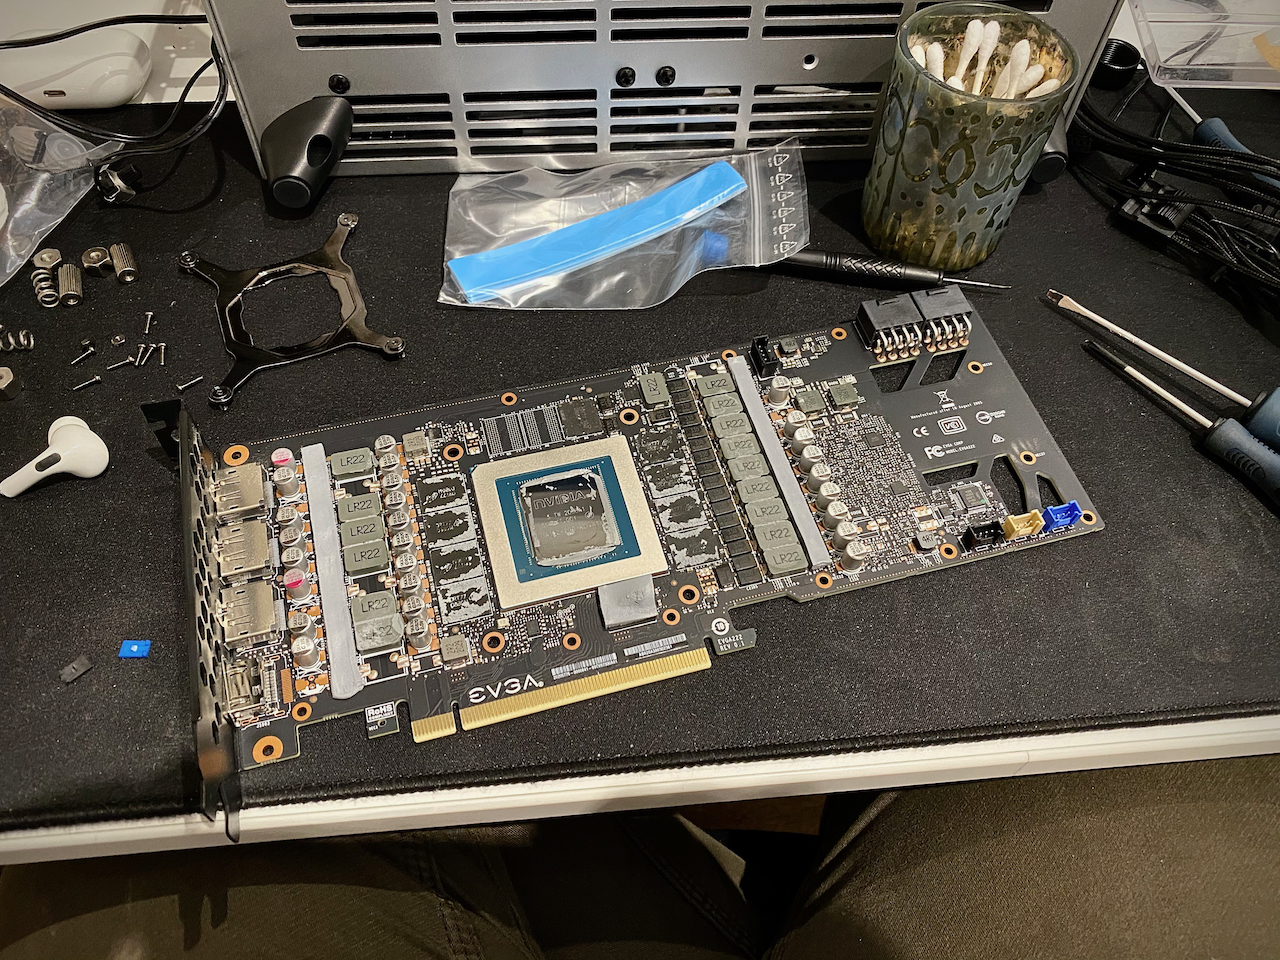 The graphics card with no cooler on. The components are all visible and there is still grey thermal paste coating some of the components. The desk is in disarray around the card.